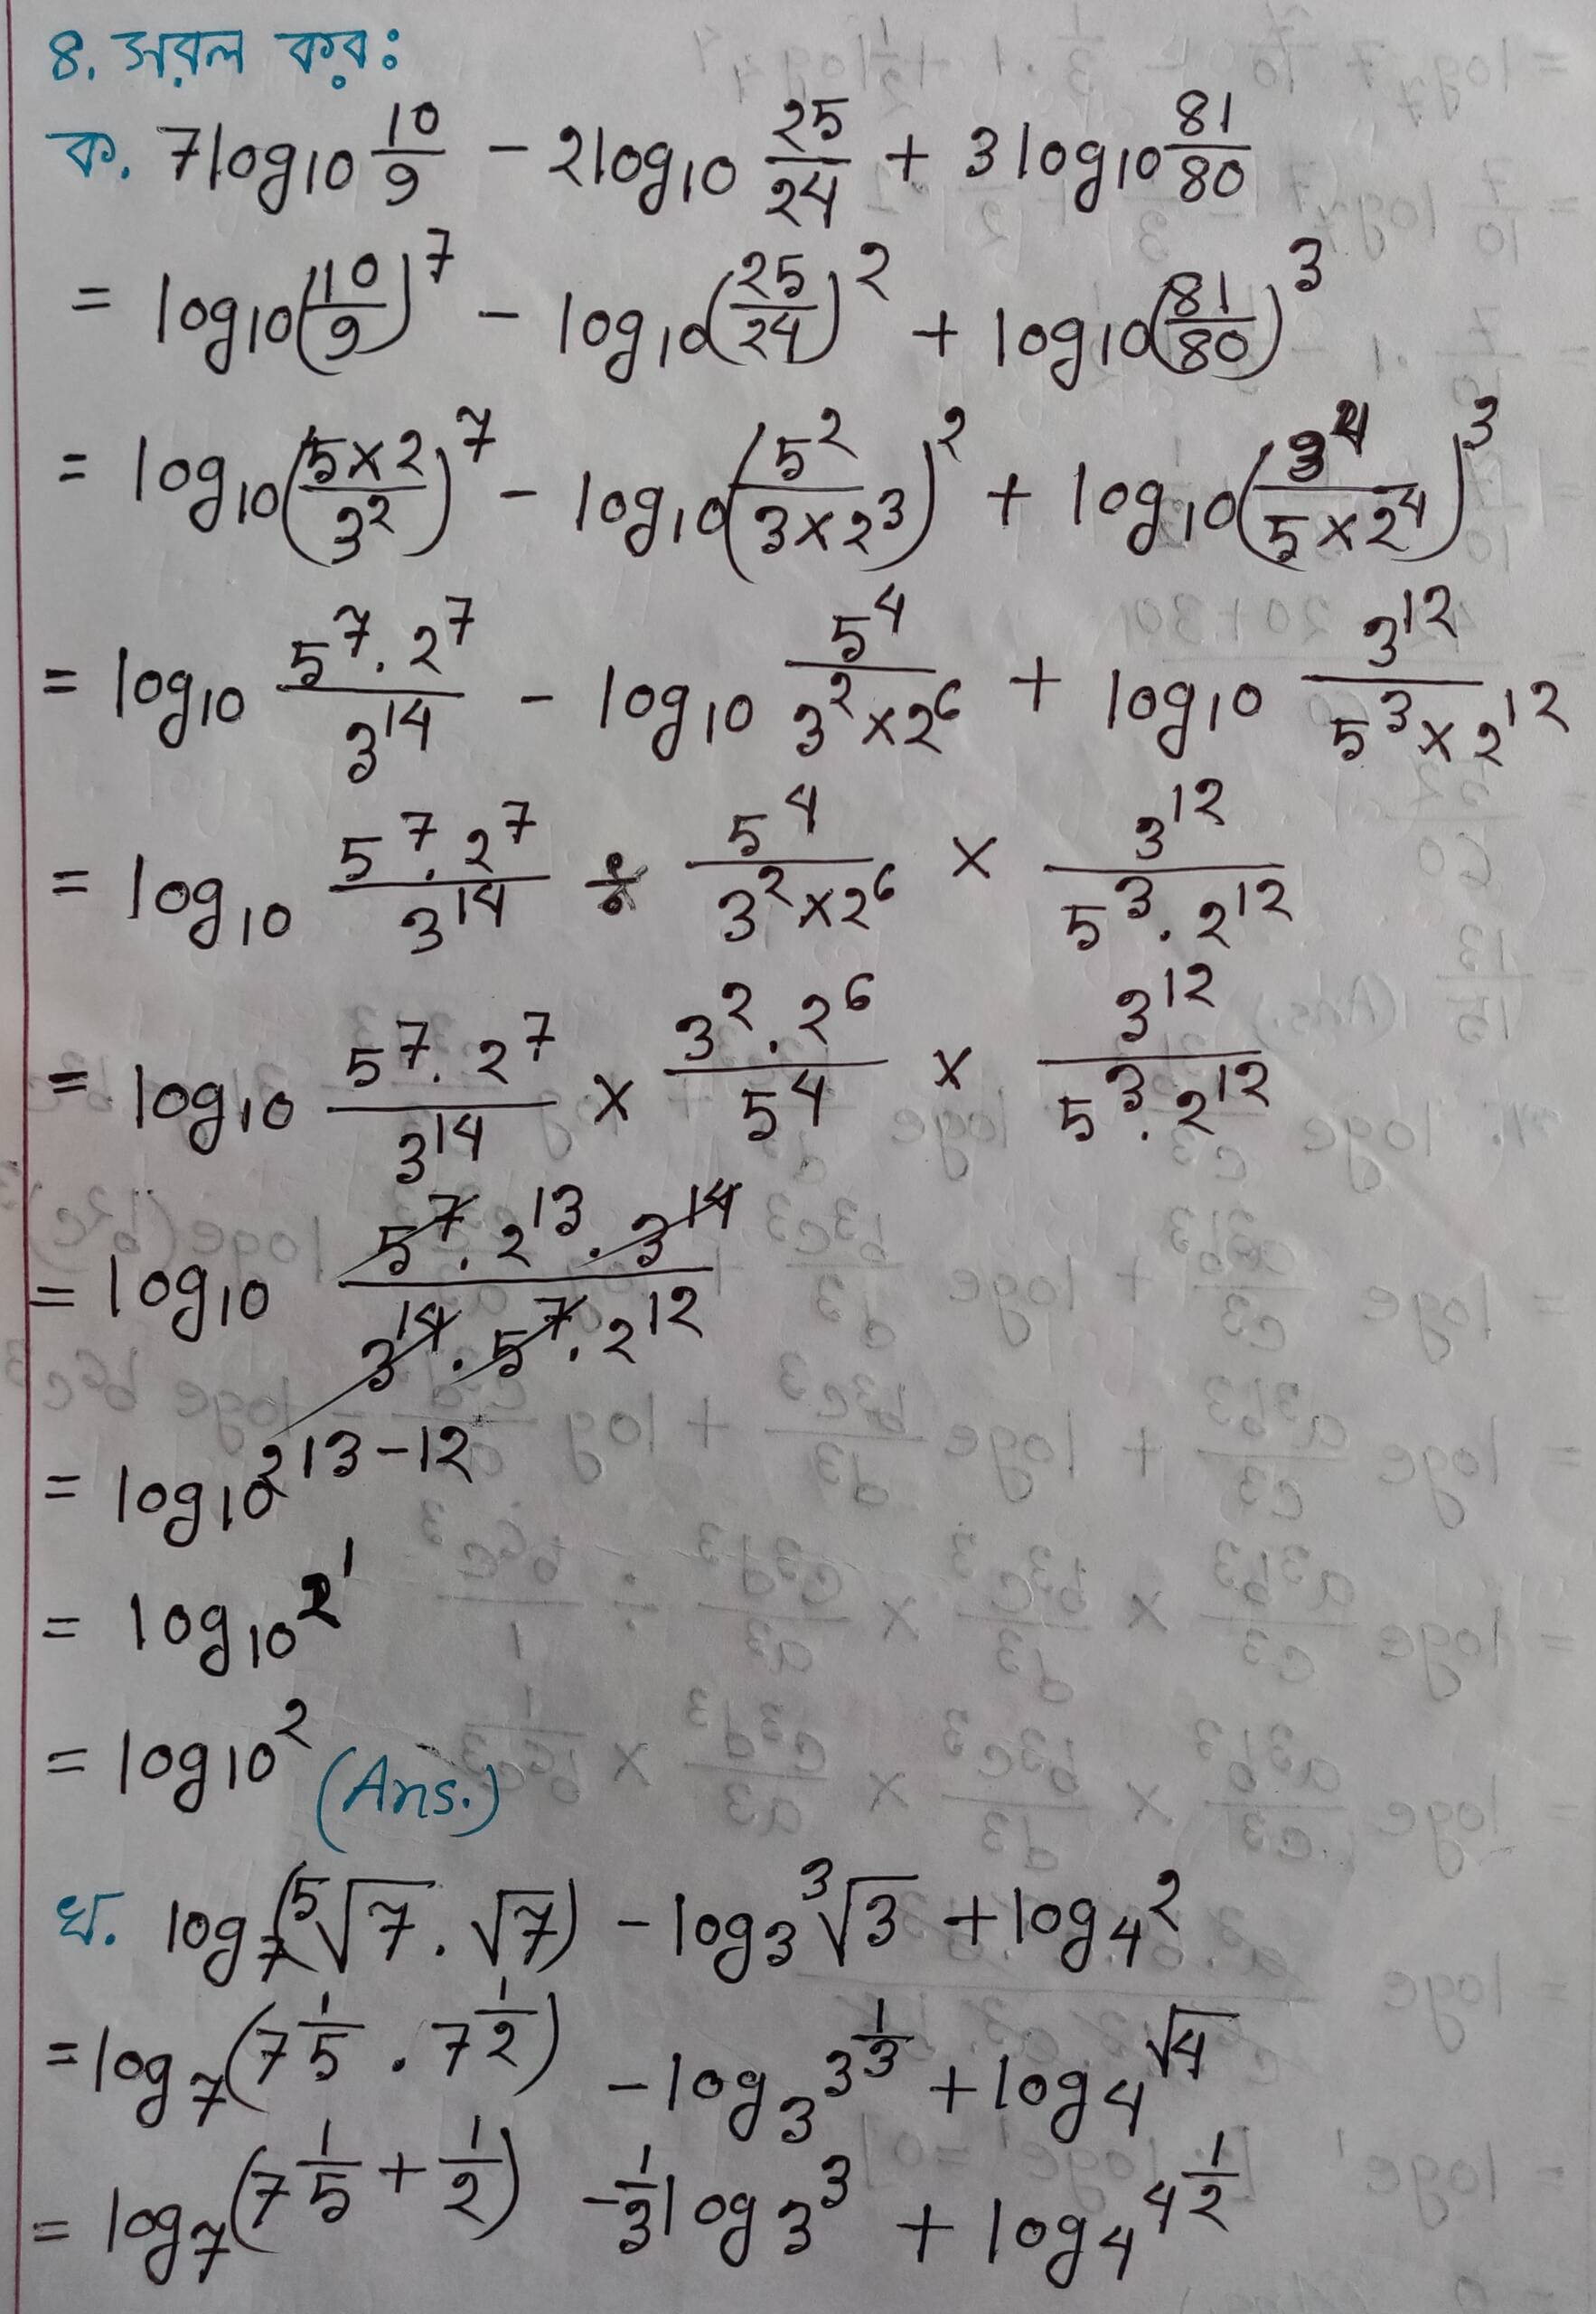 General Math Chapter 4